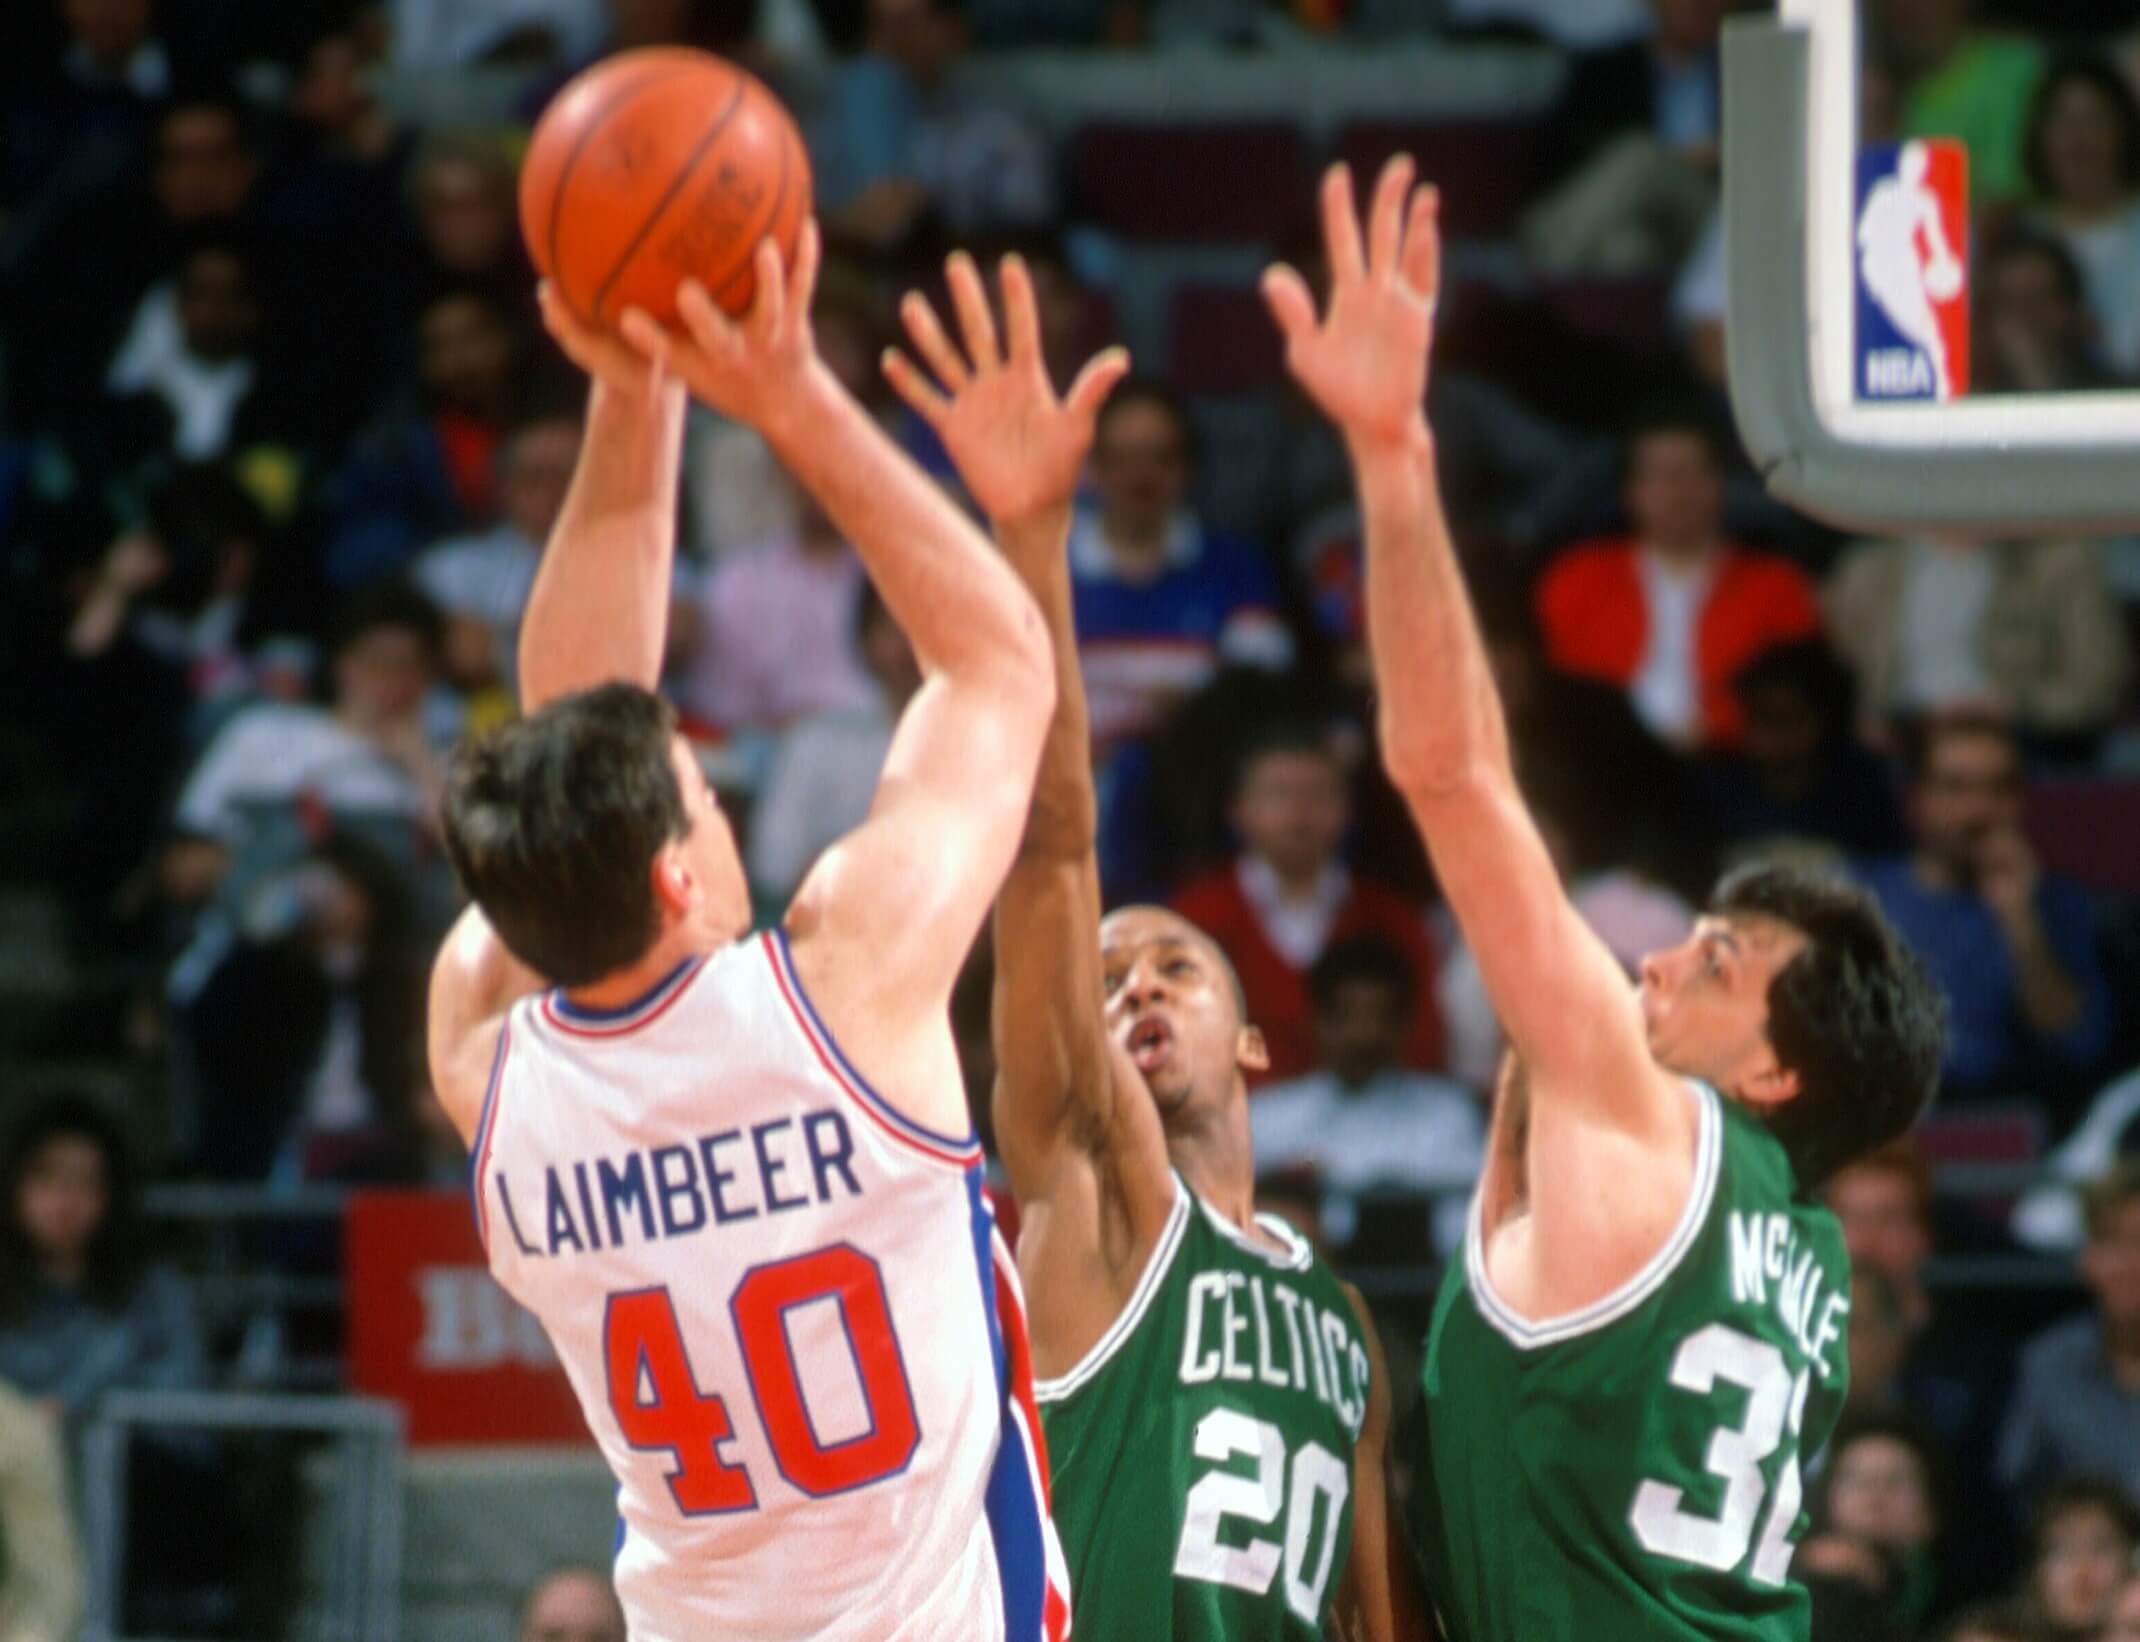 Bill Laimbeer of the Detroit Pistons shoots over Kevin McHale and Brian Shaw of the Boston Celtics.